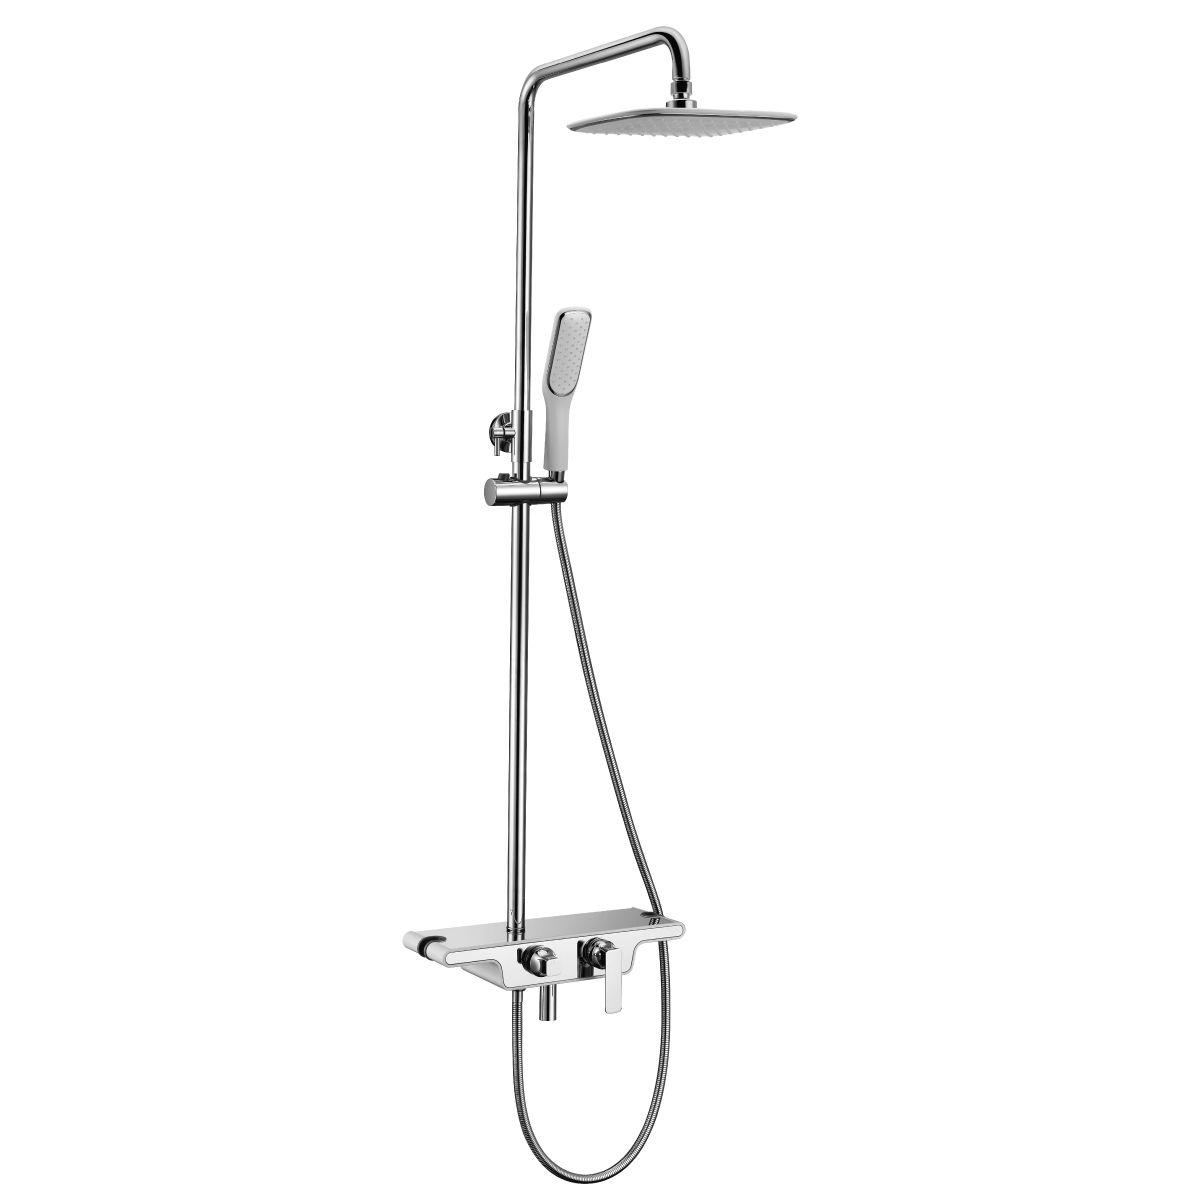 LM7006C Bath and shower faucet with adjustable rod height, swivel spout and «Tropical rain» shower head